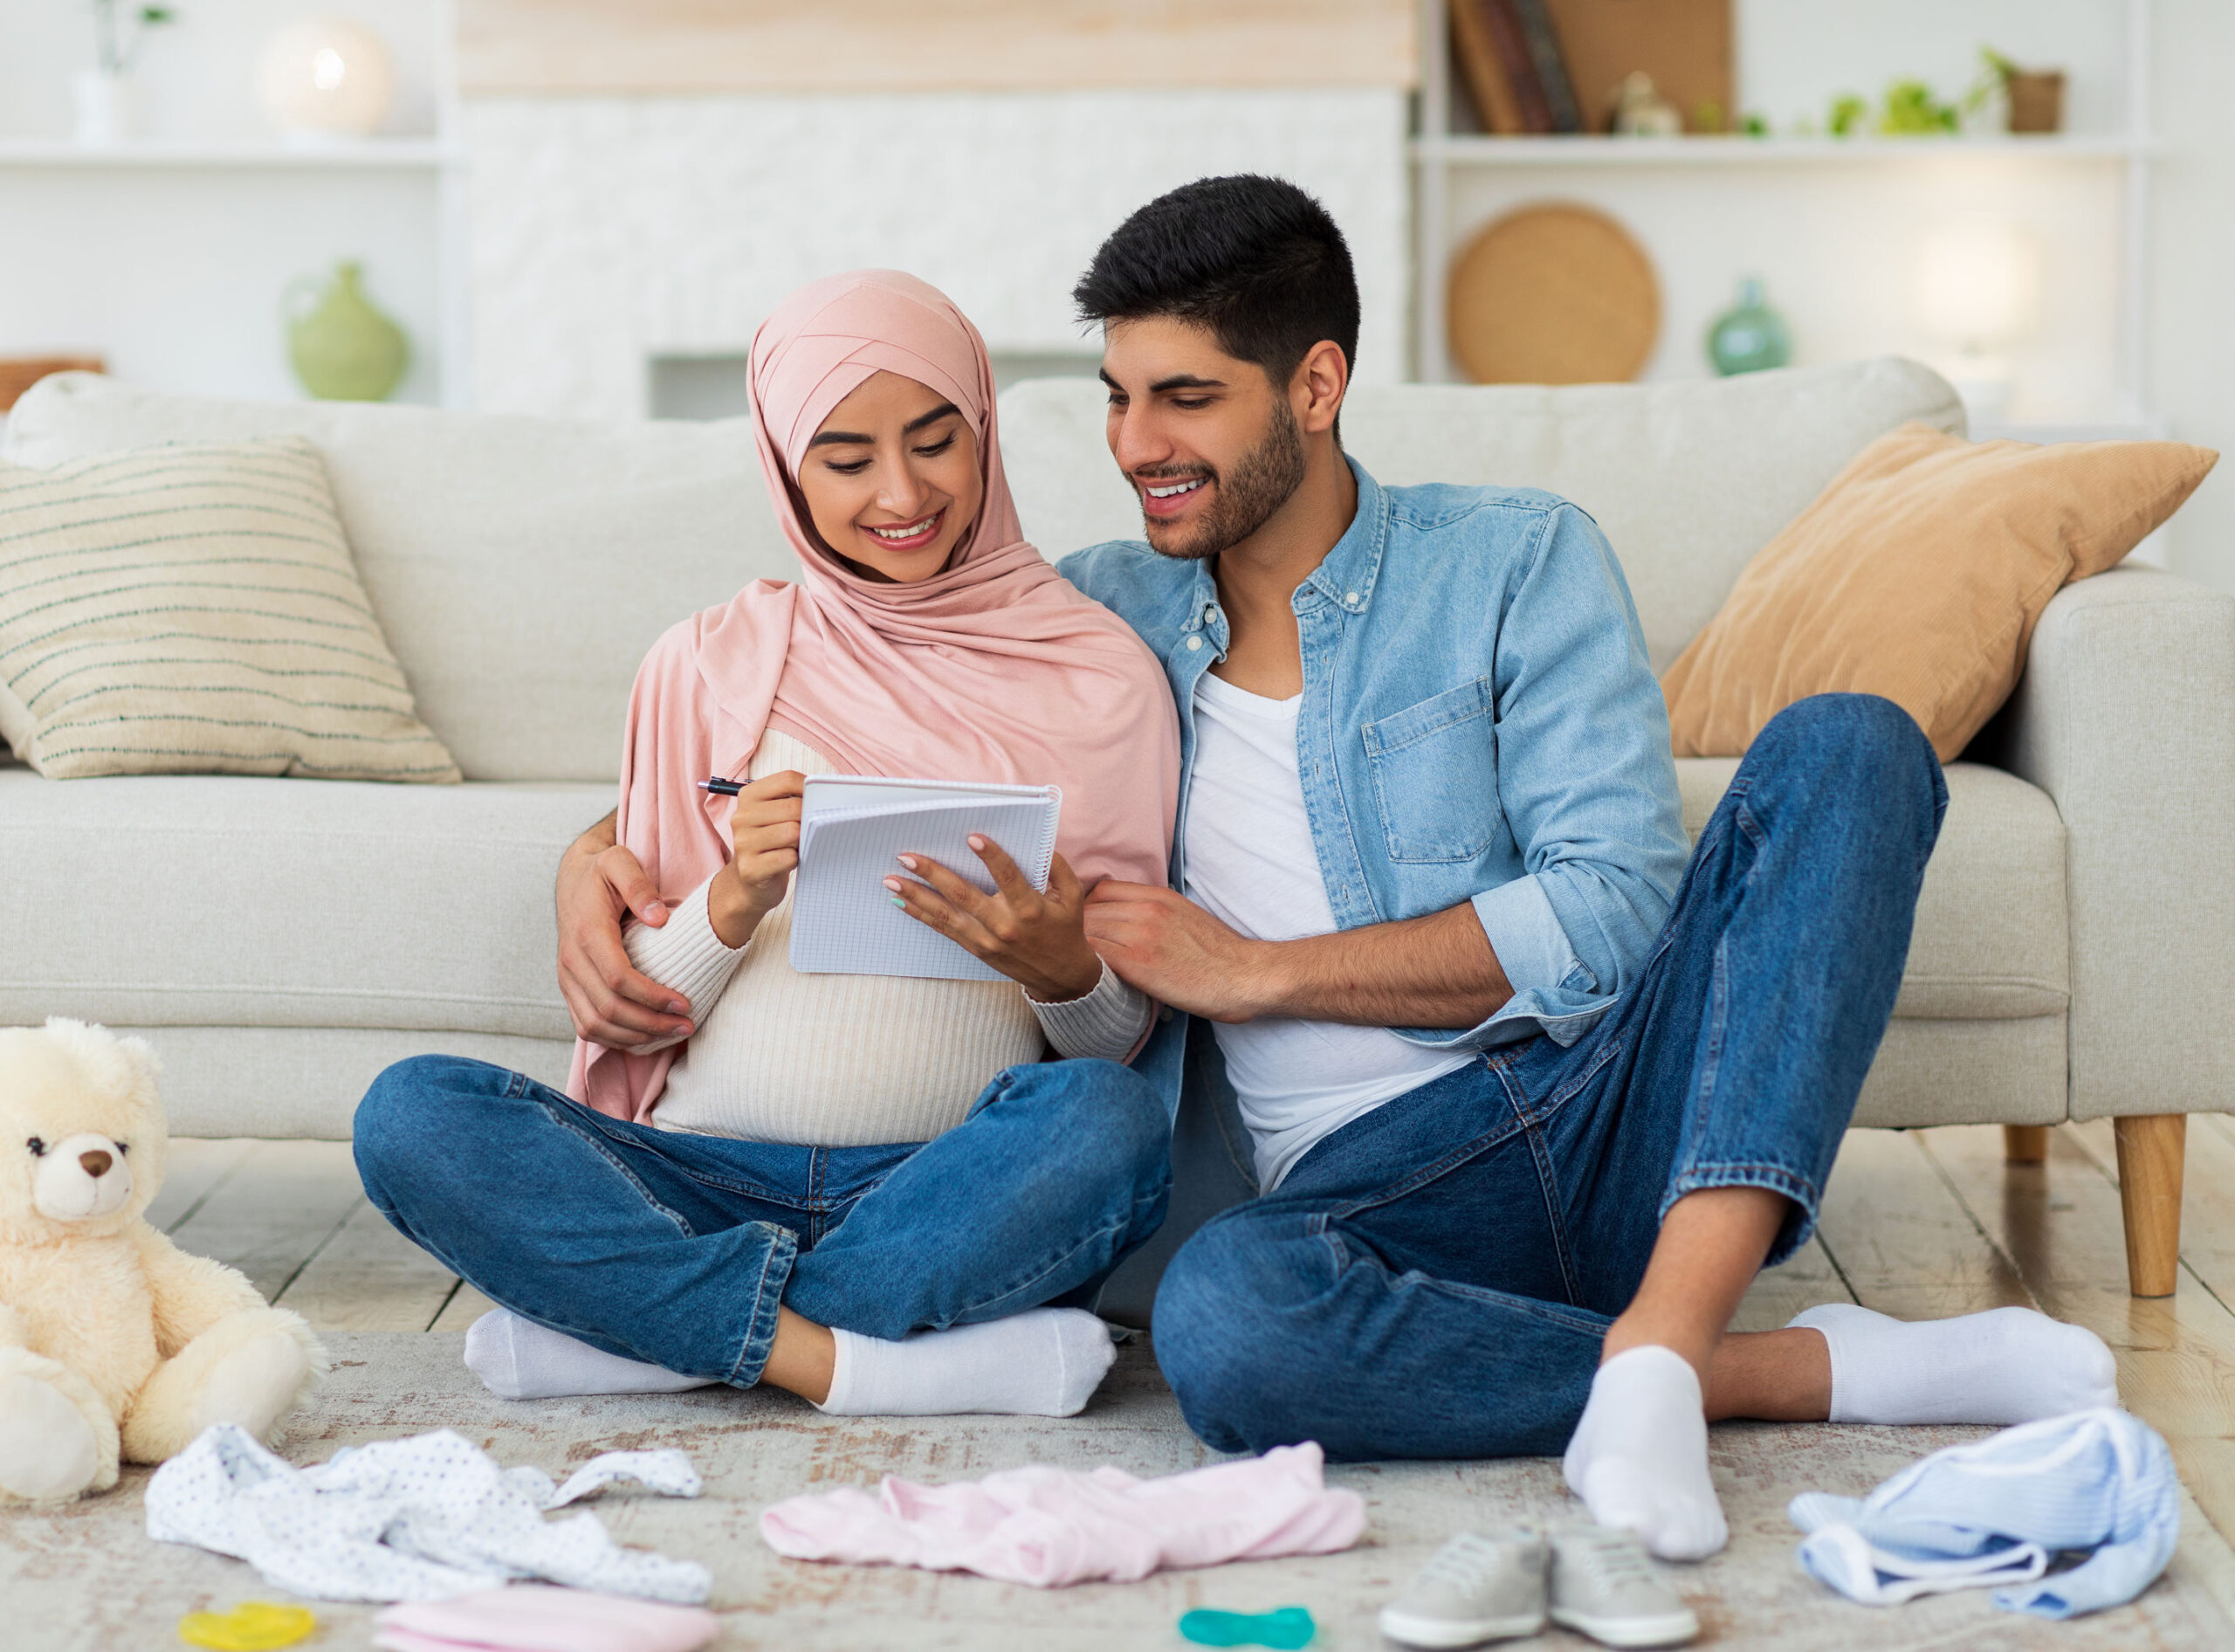 A couple with a pregnant woman sit on the floor around baby clothes and toys.